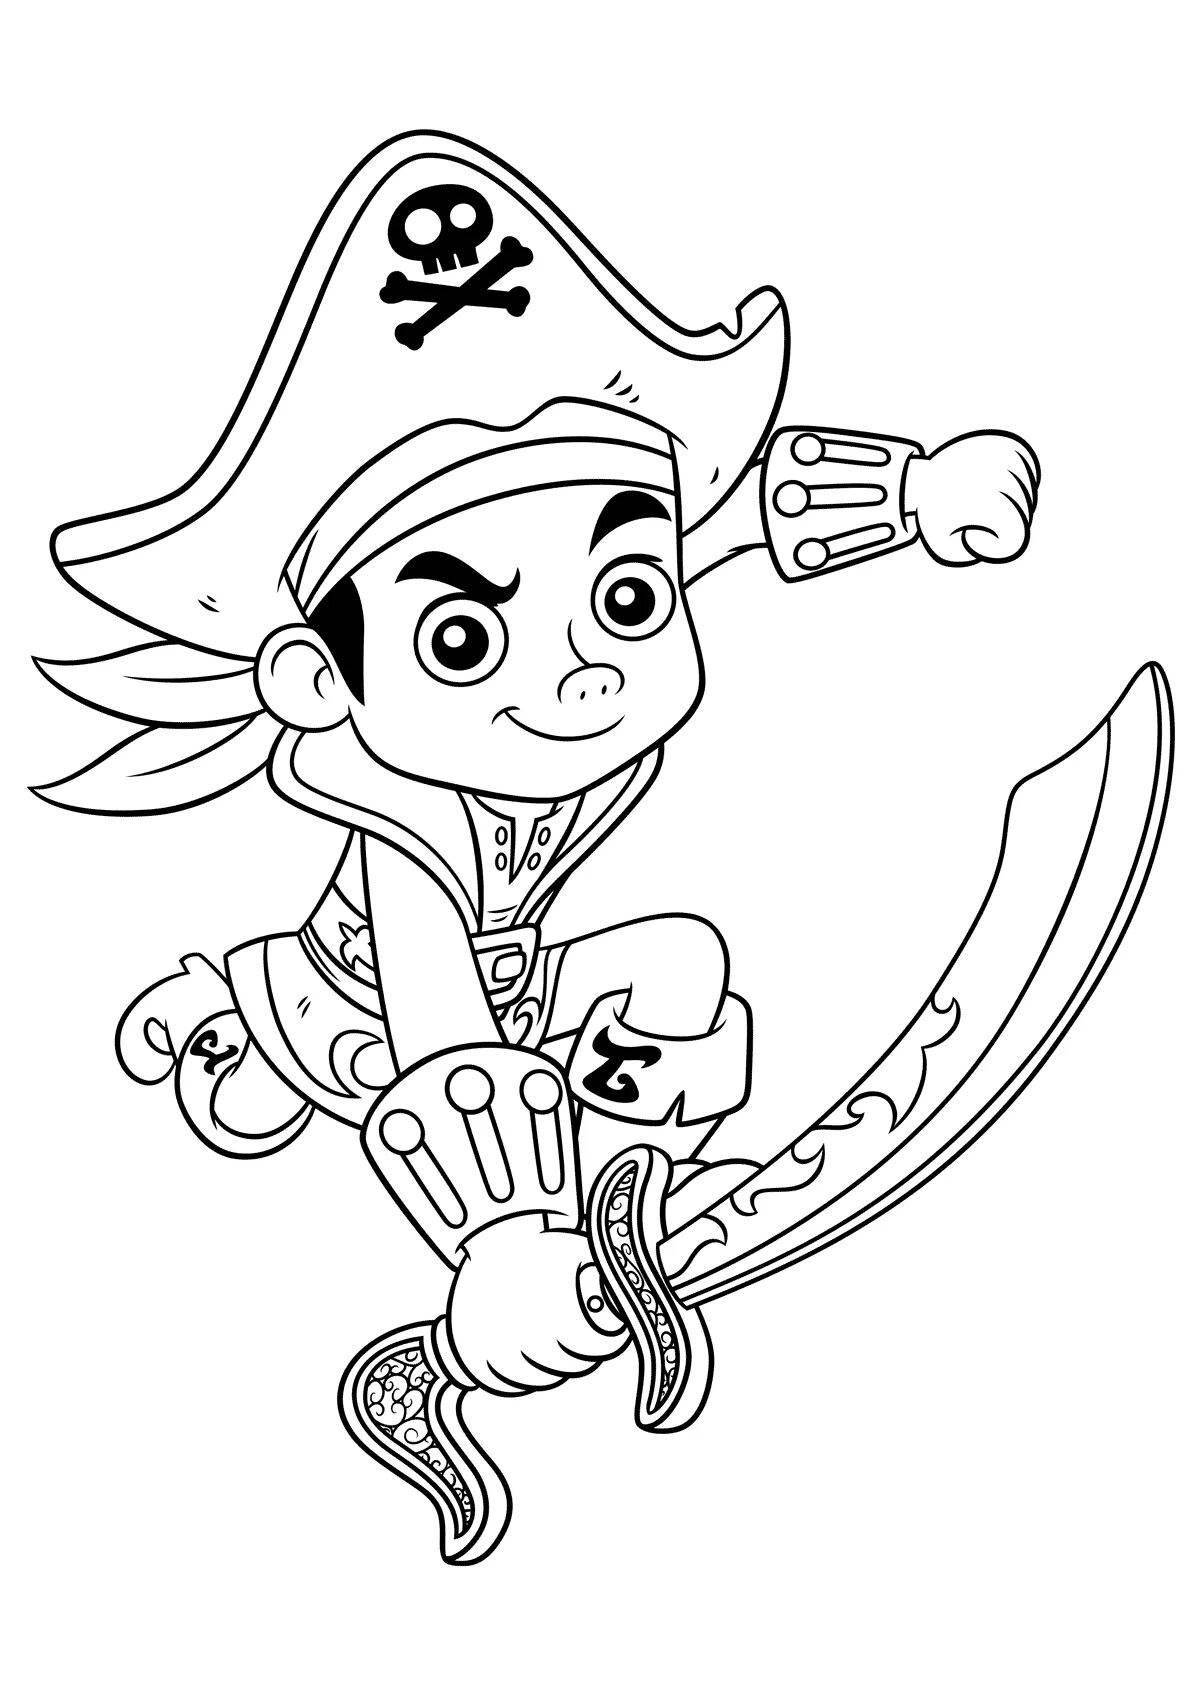 Fearless pirate coloring page